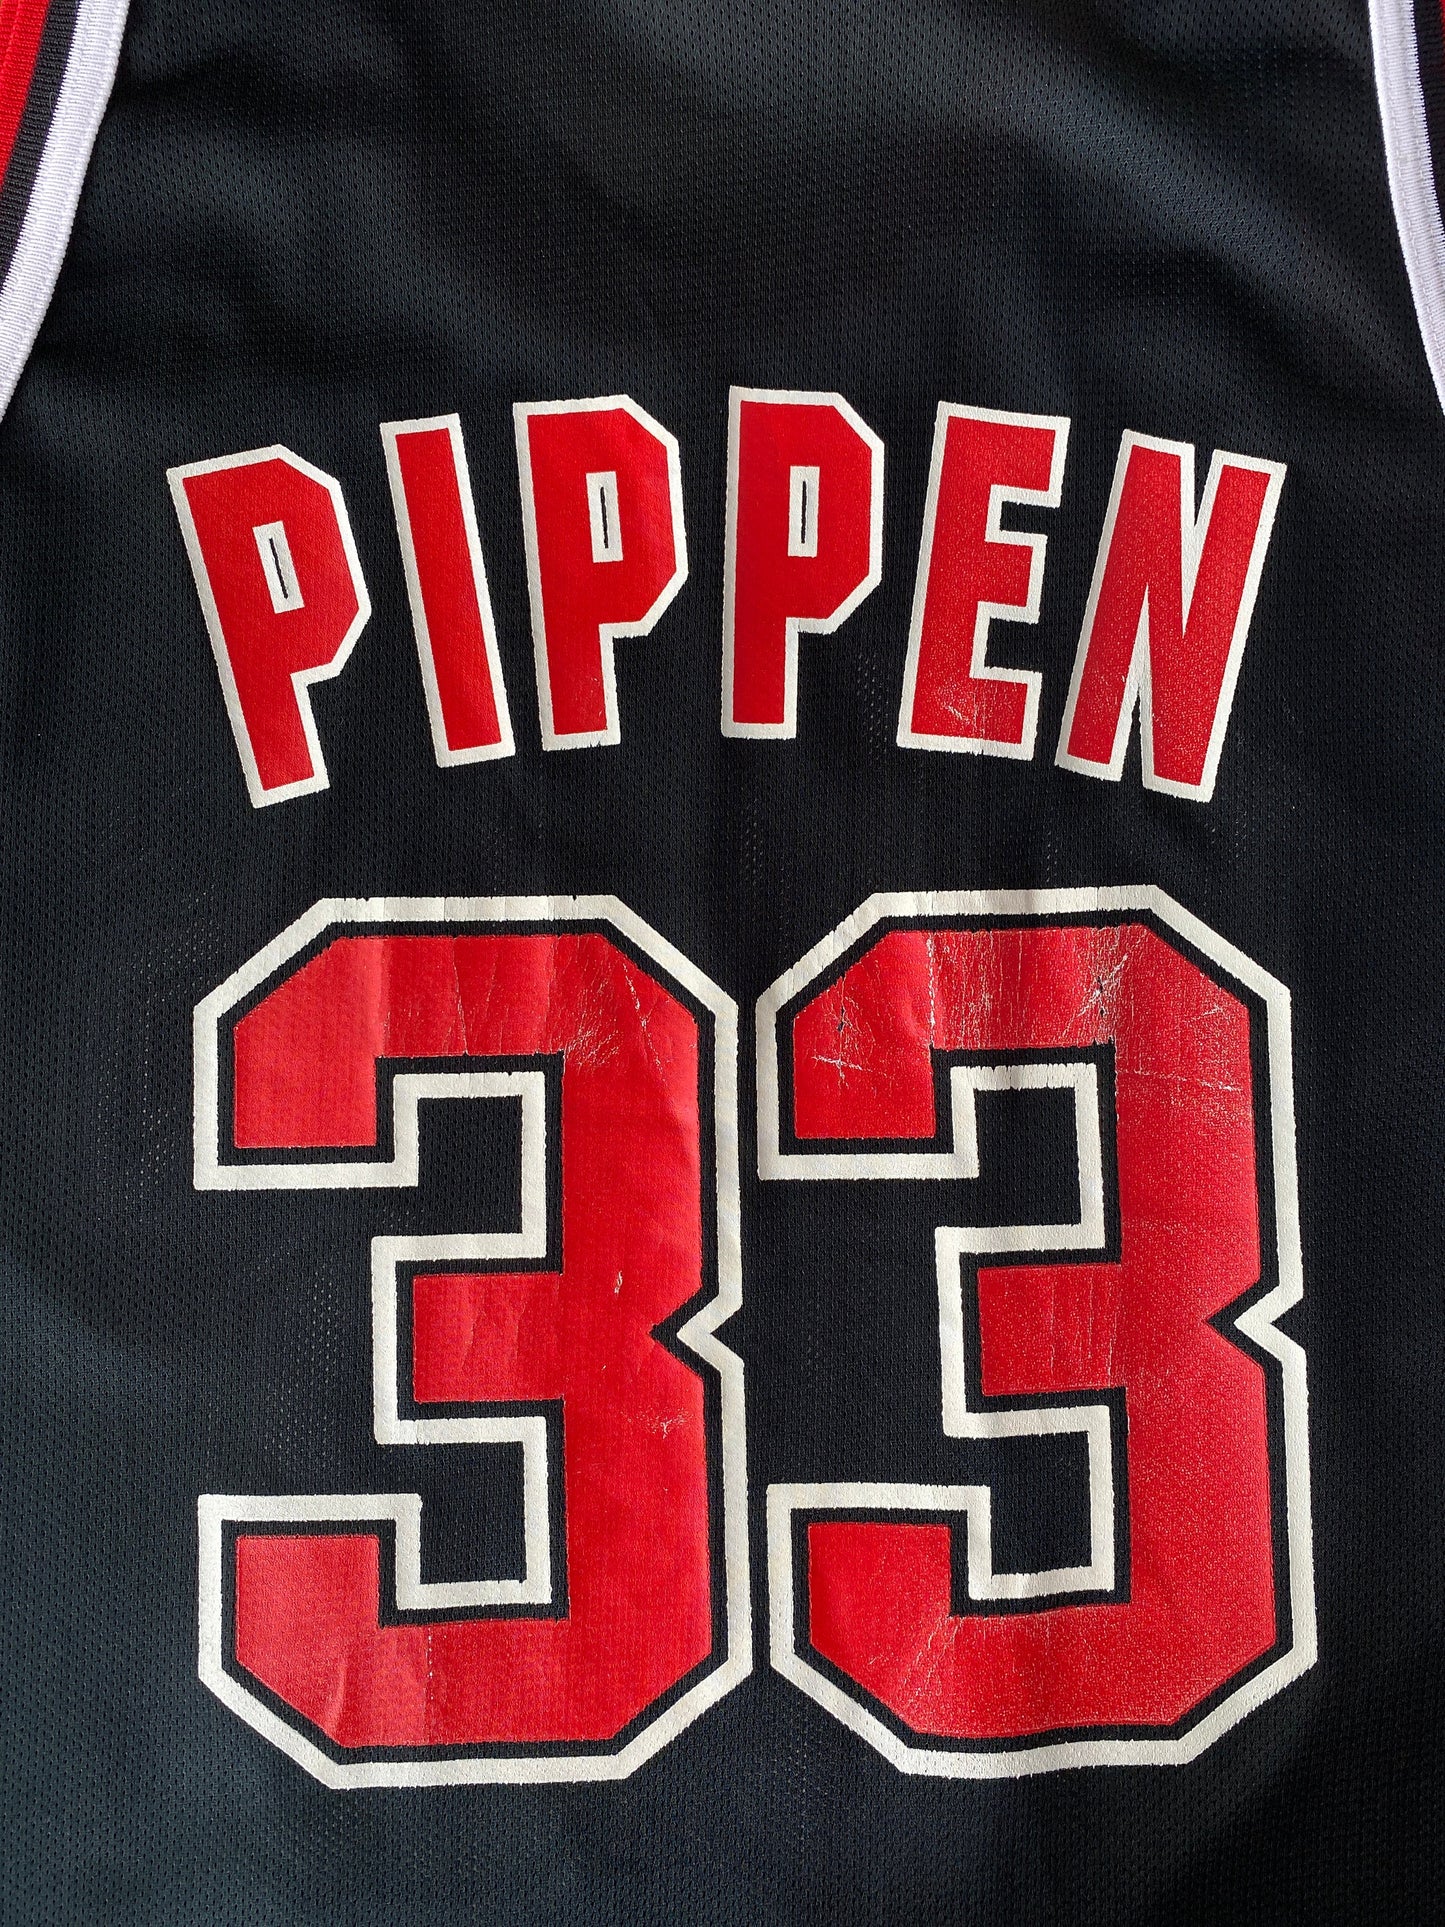 Size 48 Vintage 90s Chicago Bulls NBA Champion jersey, Pippen #33